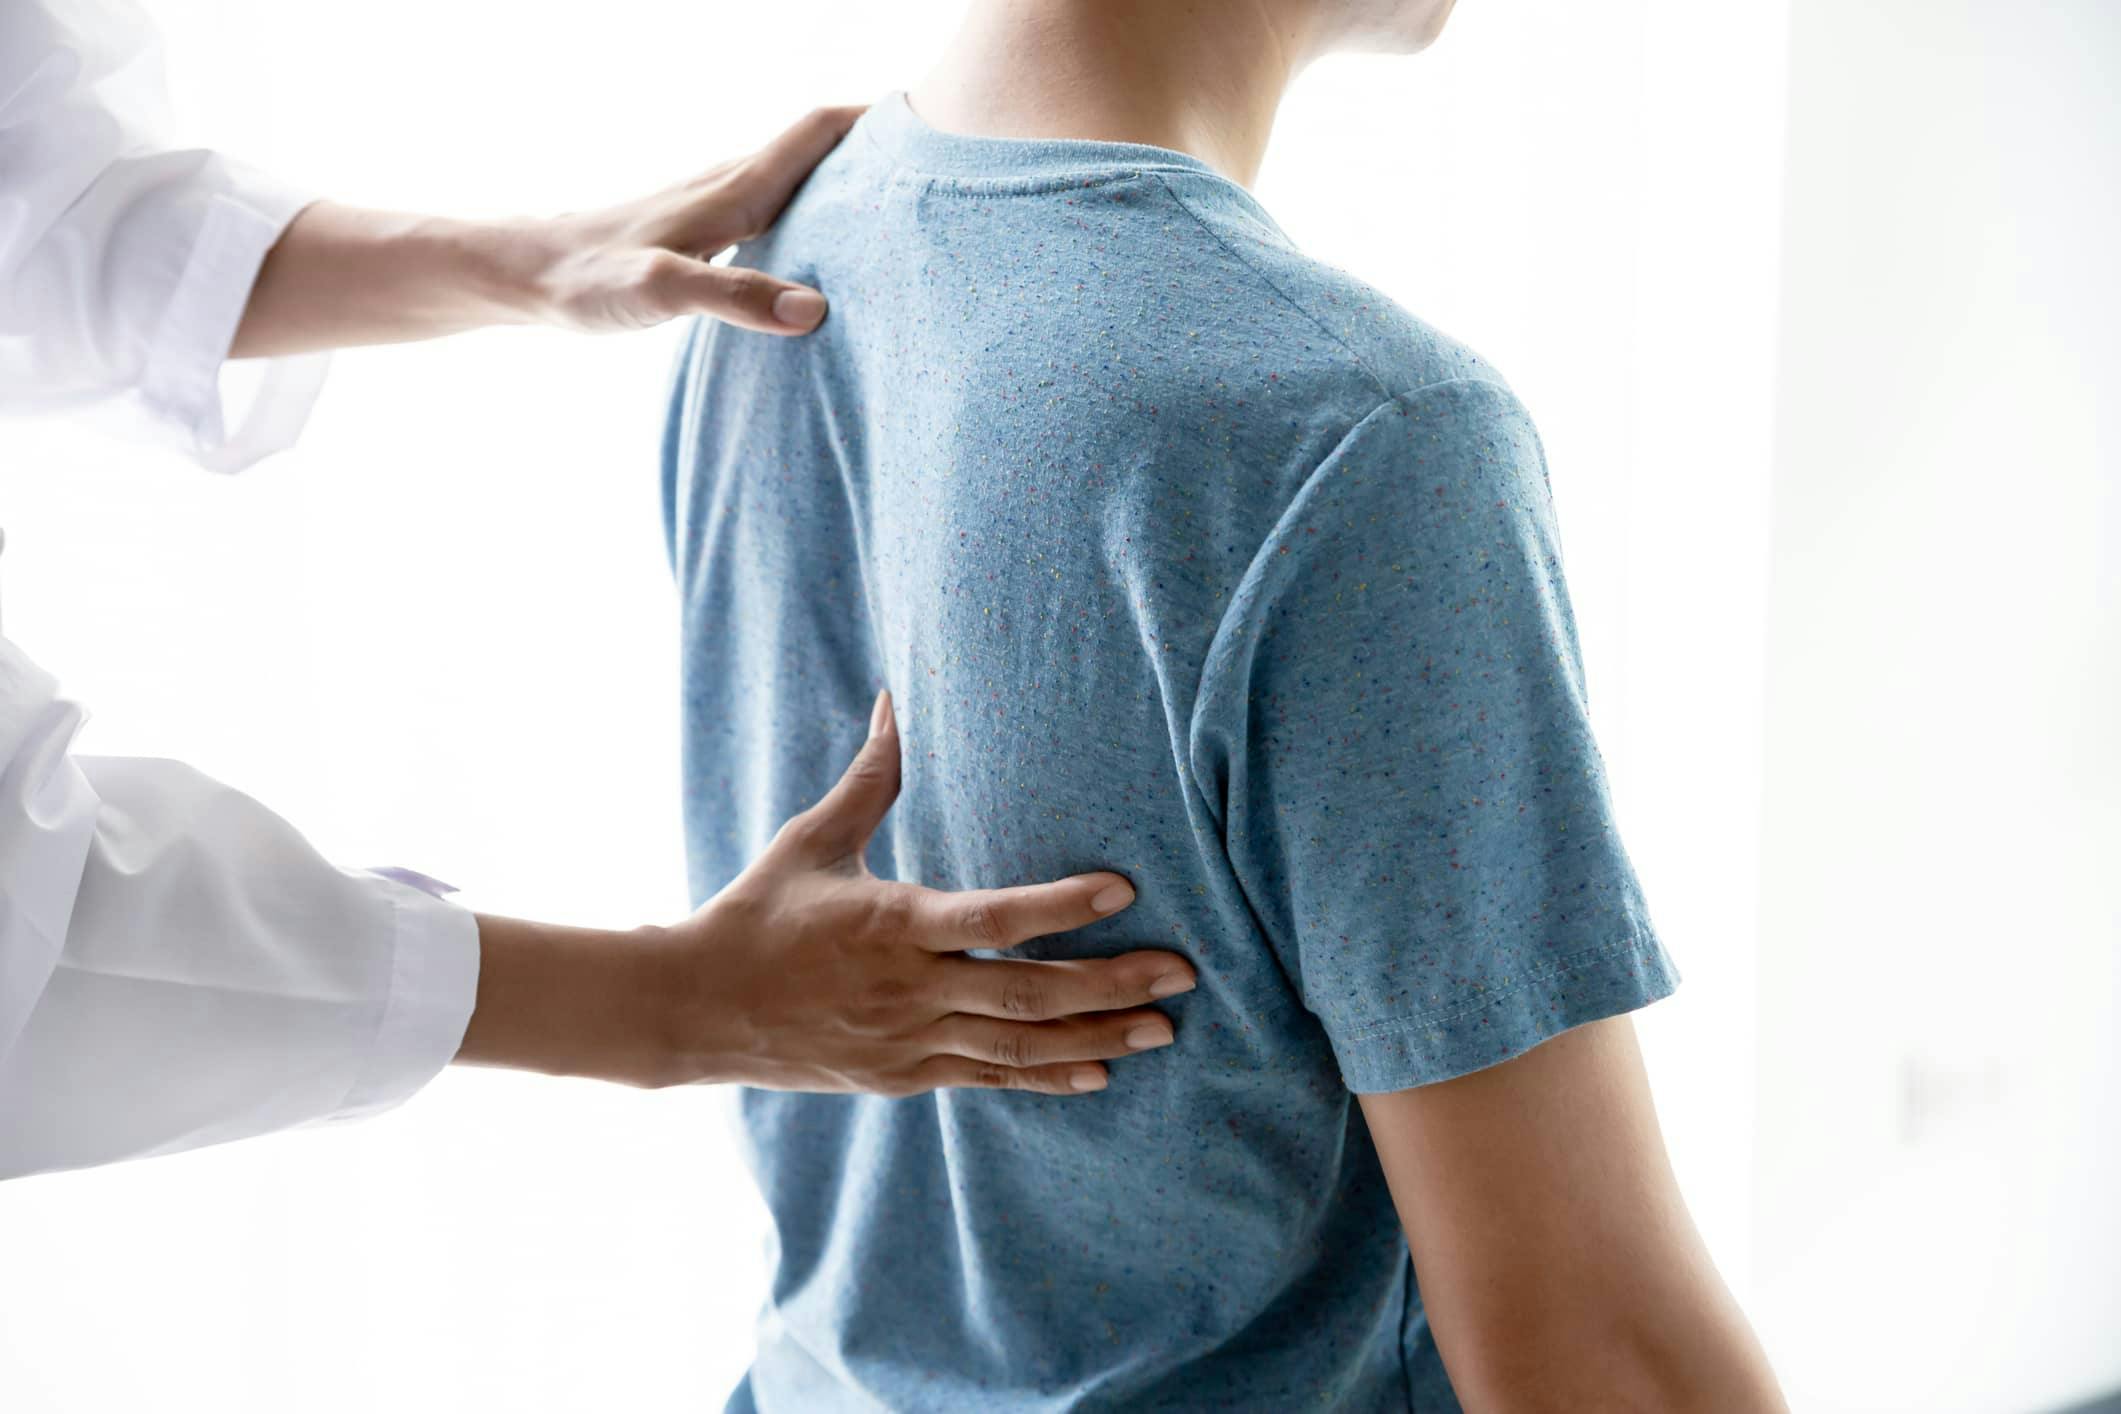 Doctor examining patient's back and spine